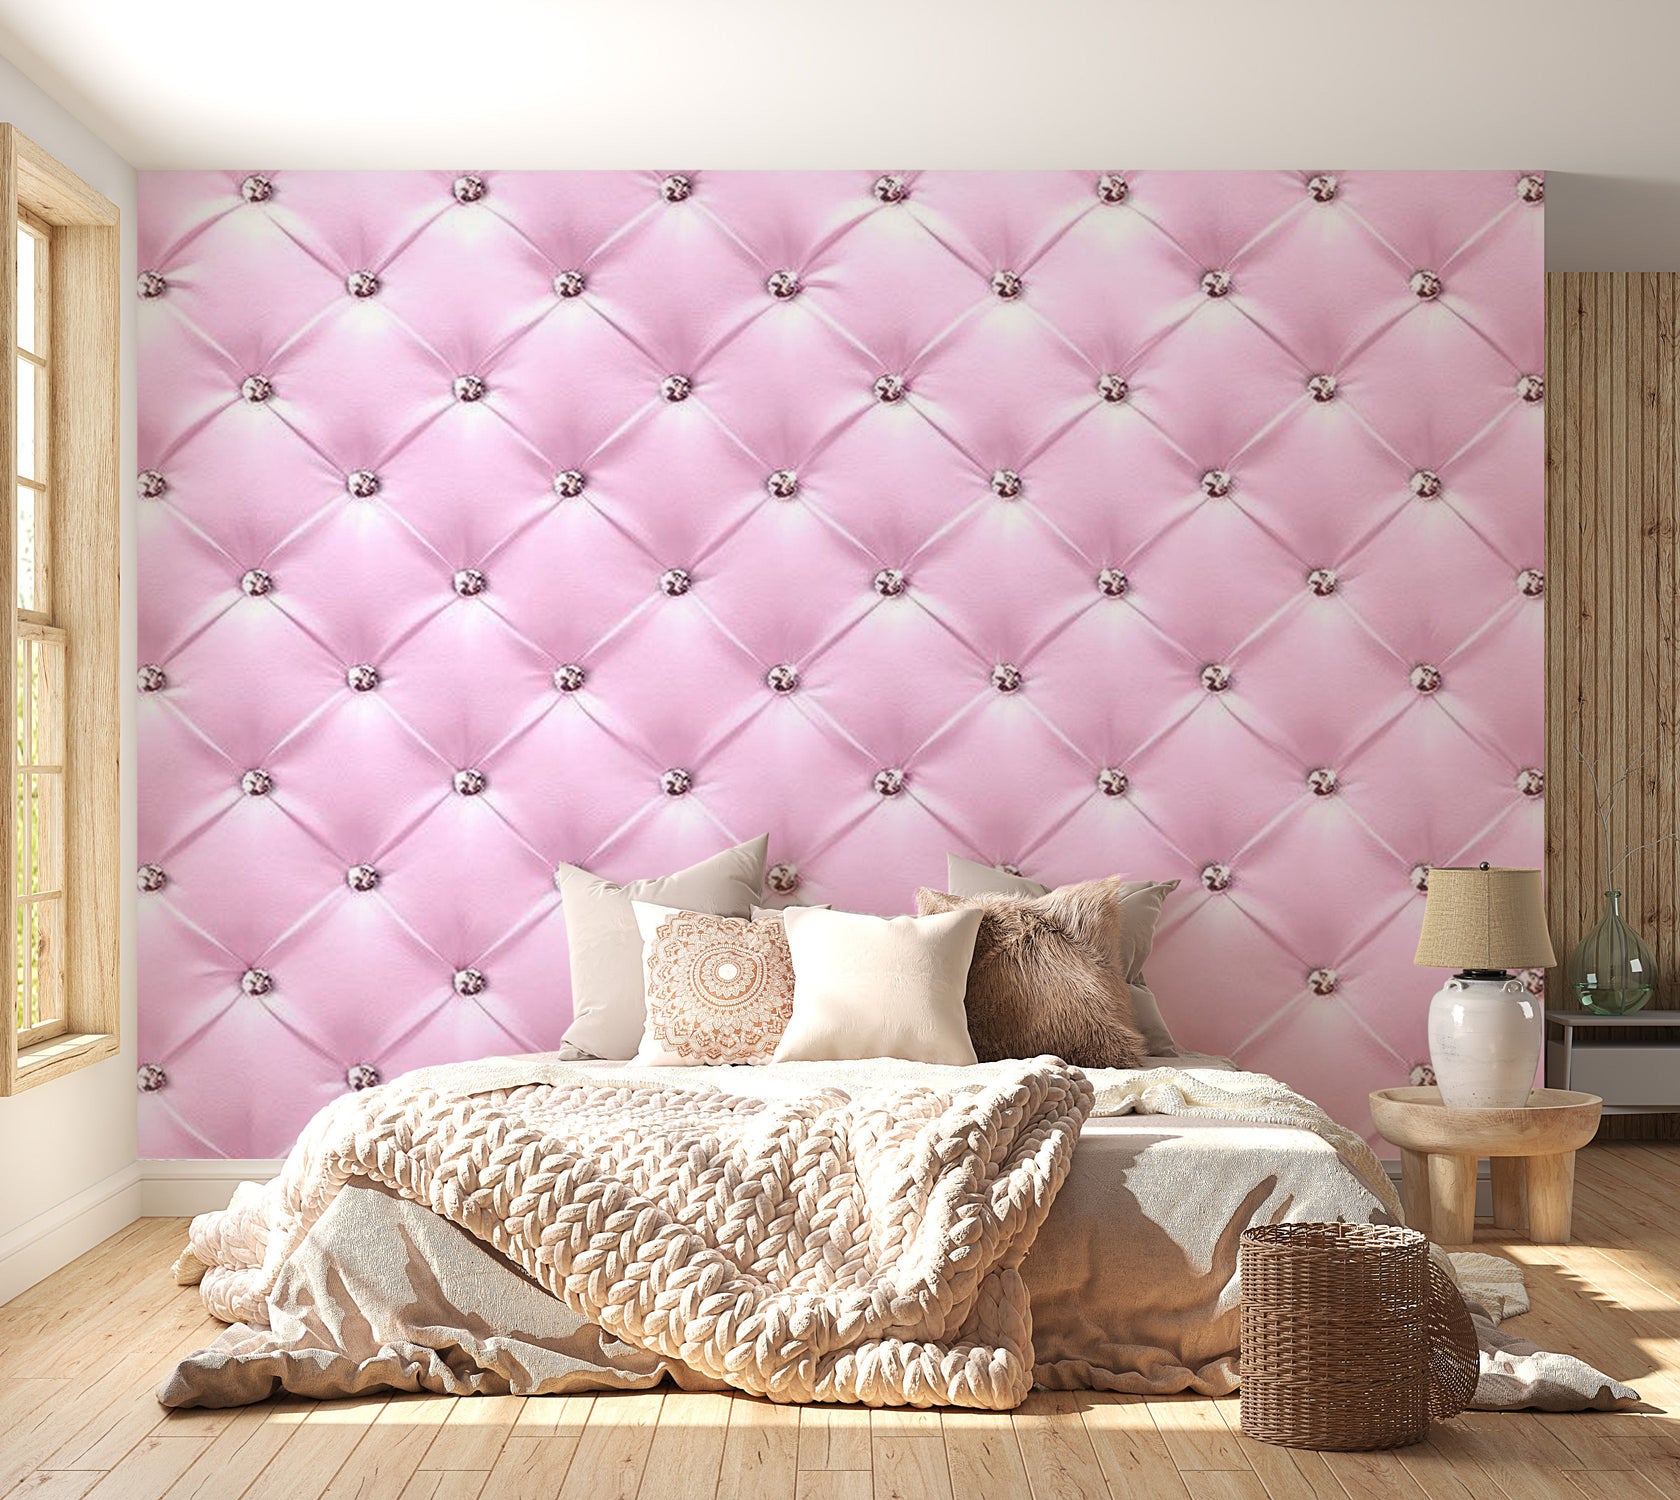 Peel & Stick Wall Mural - Pink Chesterfield And Diamonds - Removable Wall Decals